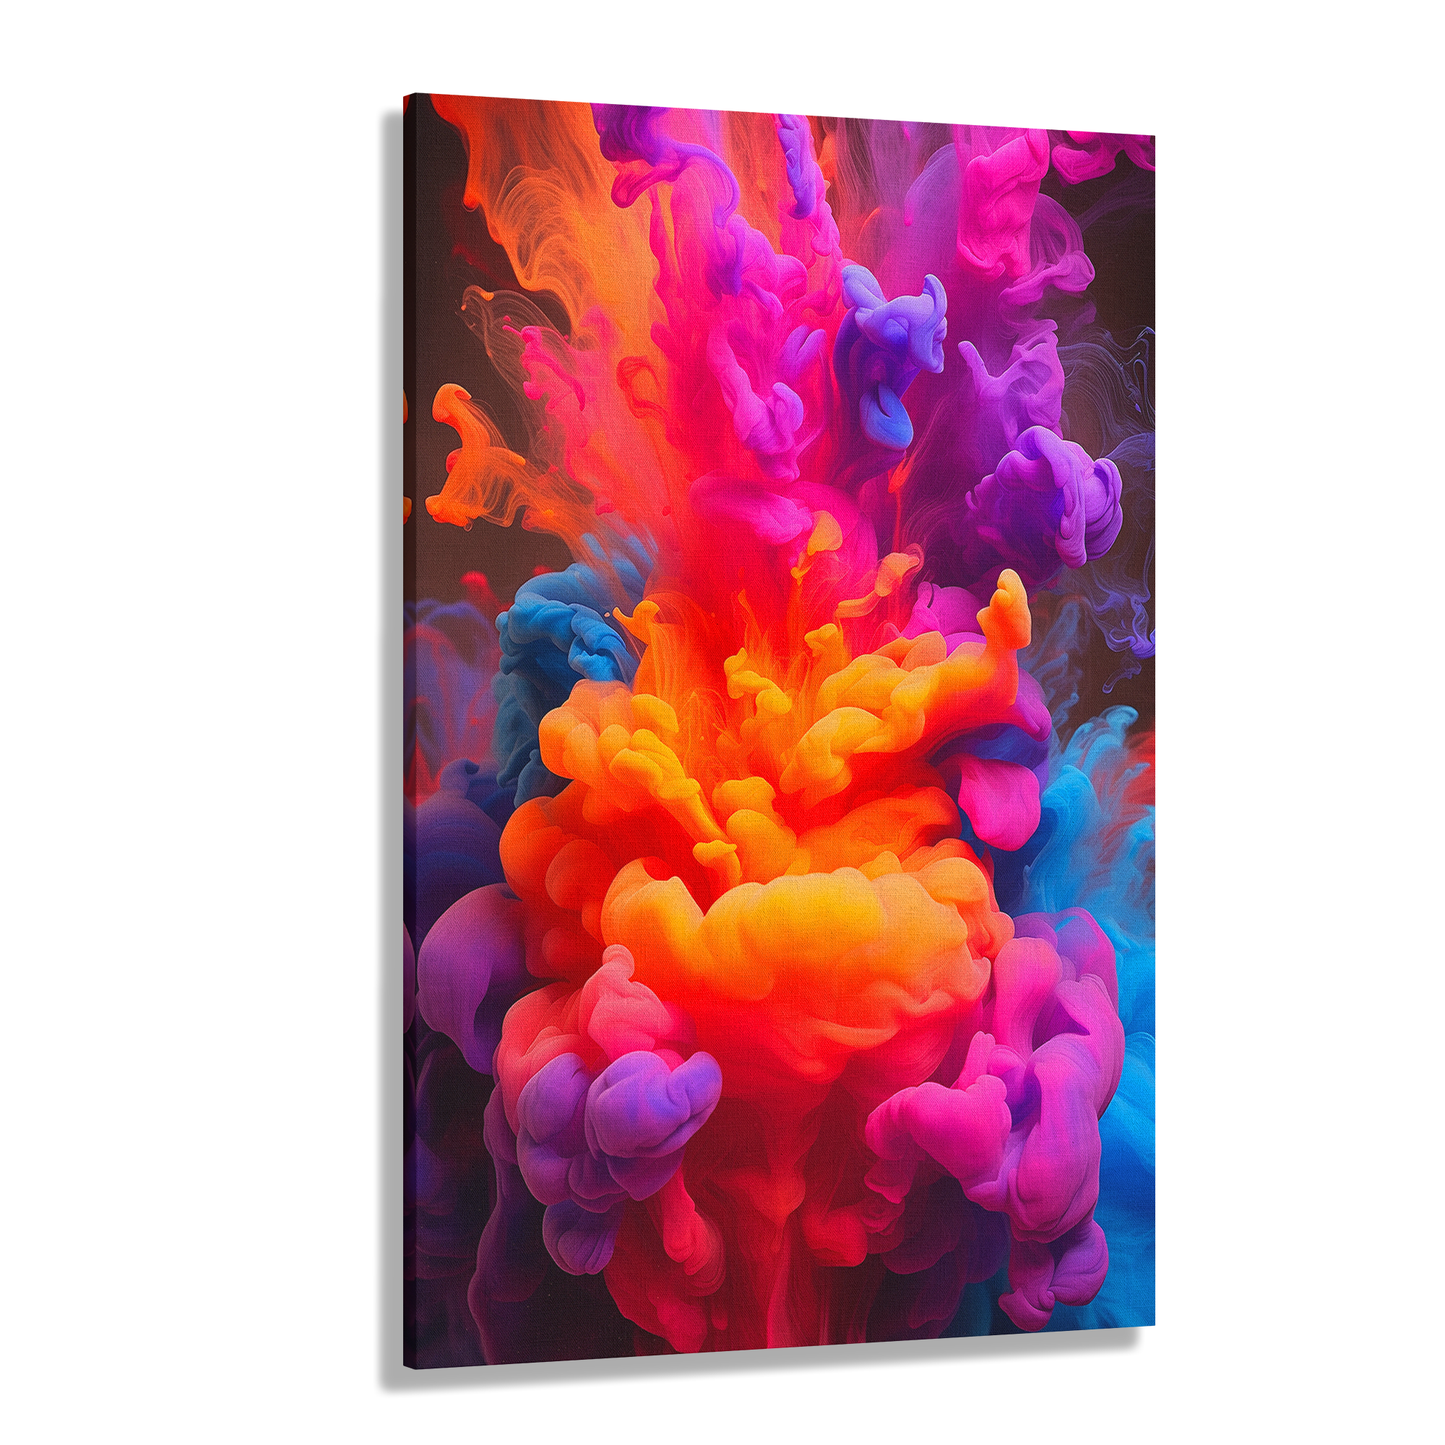 Neon Smoke (Canvas)Neon Smoke (Canvas  Matte finish, stretched, with a depth of 1.25 inches)
Make an art statement with RimaGallery's responsibly made canvases. Eco-friendly cotton/polRimaGallery